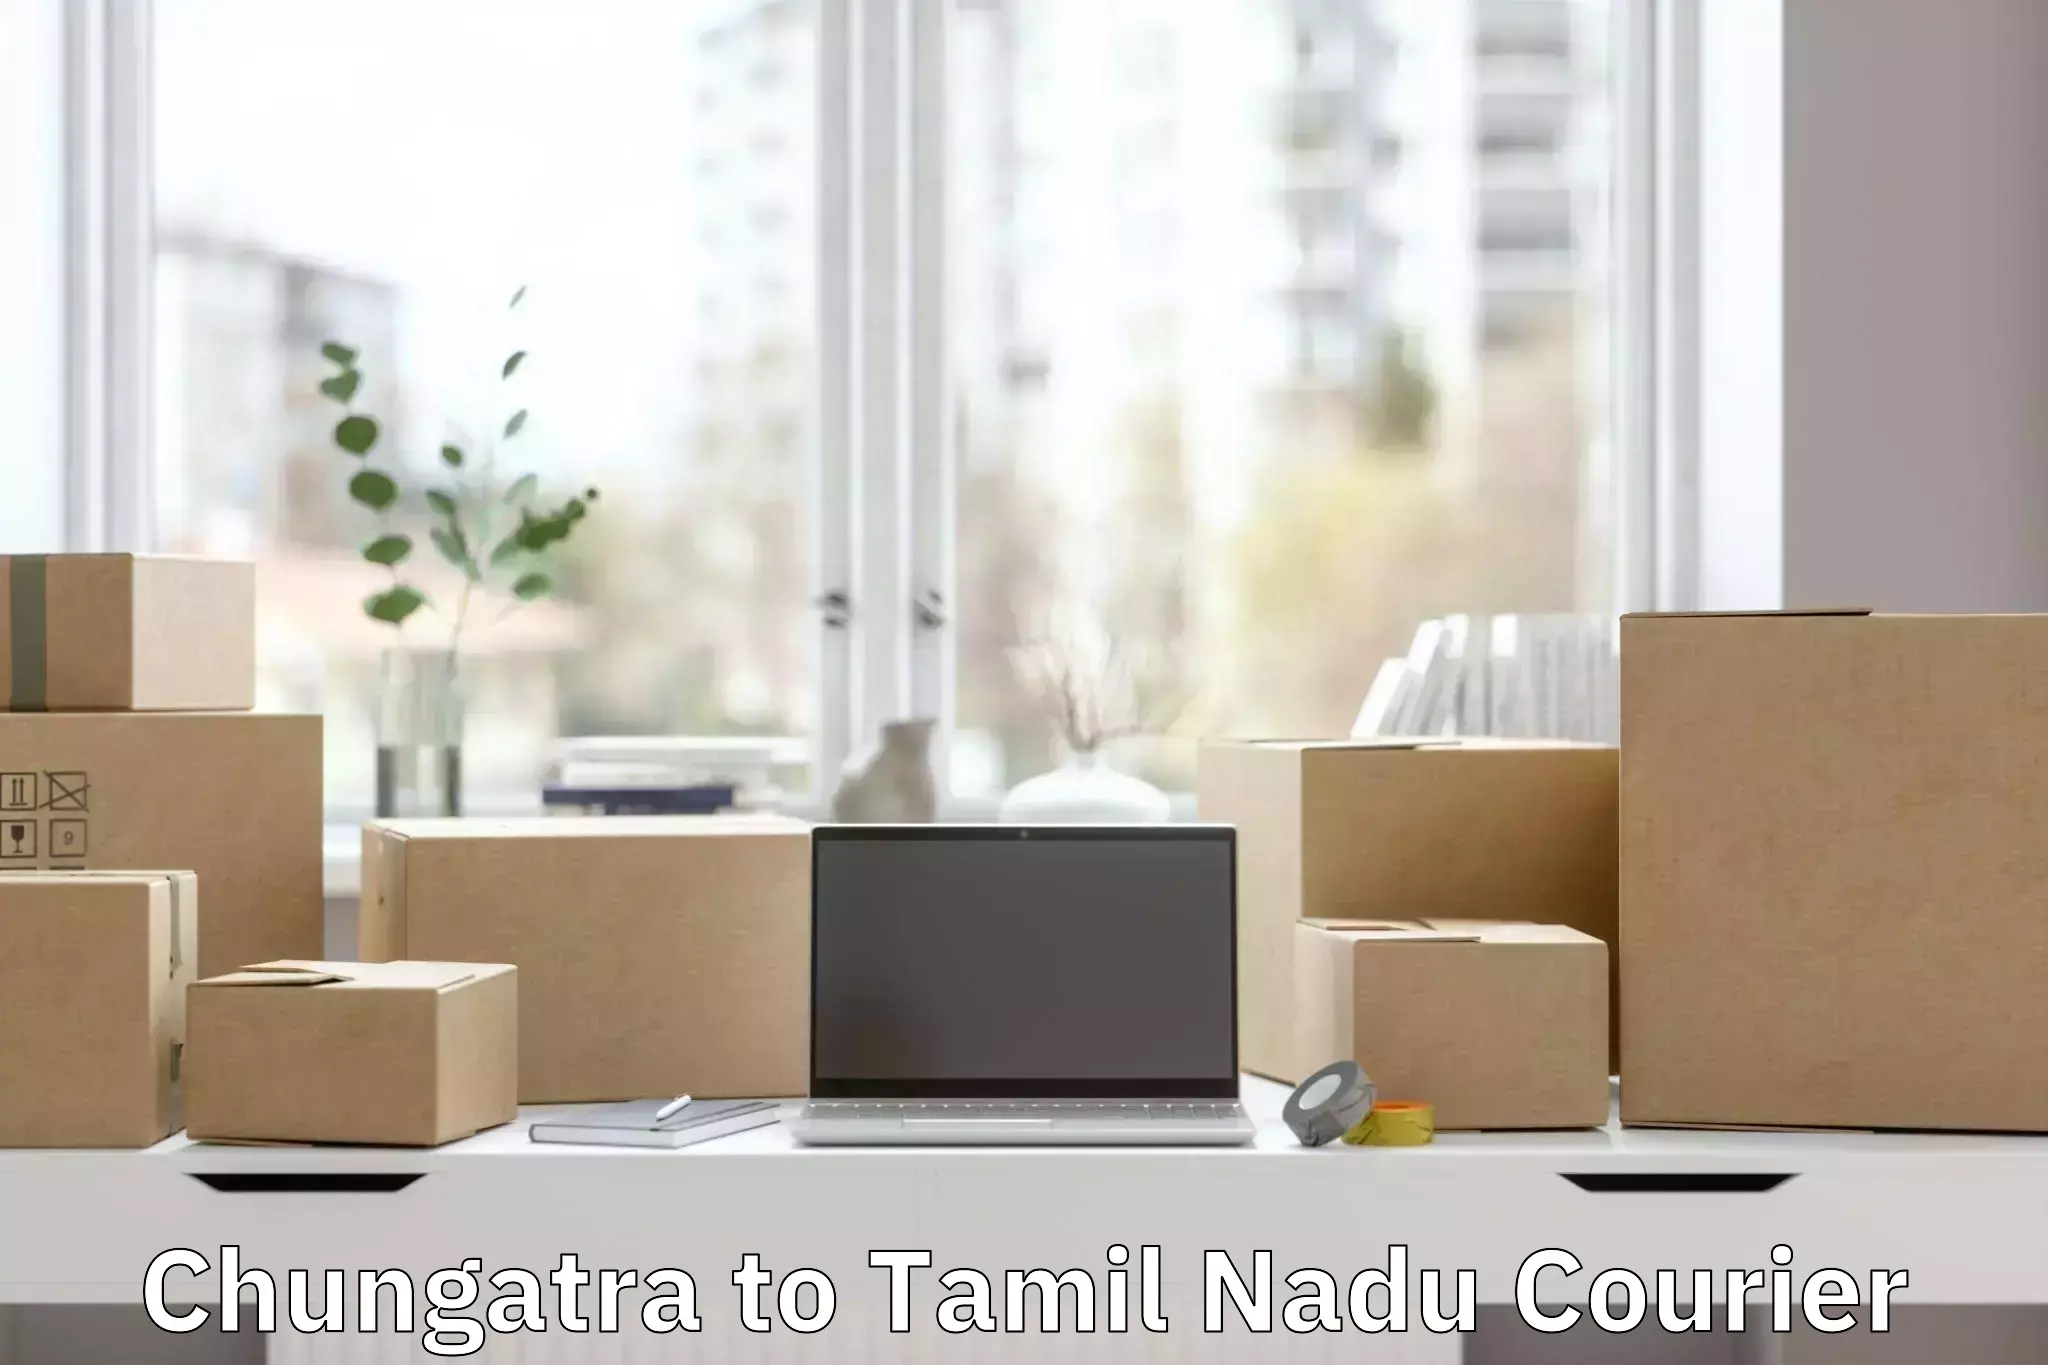 Luggage delivery system Chungatra to Tamil Nadu